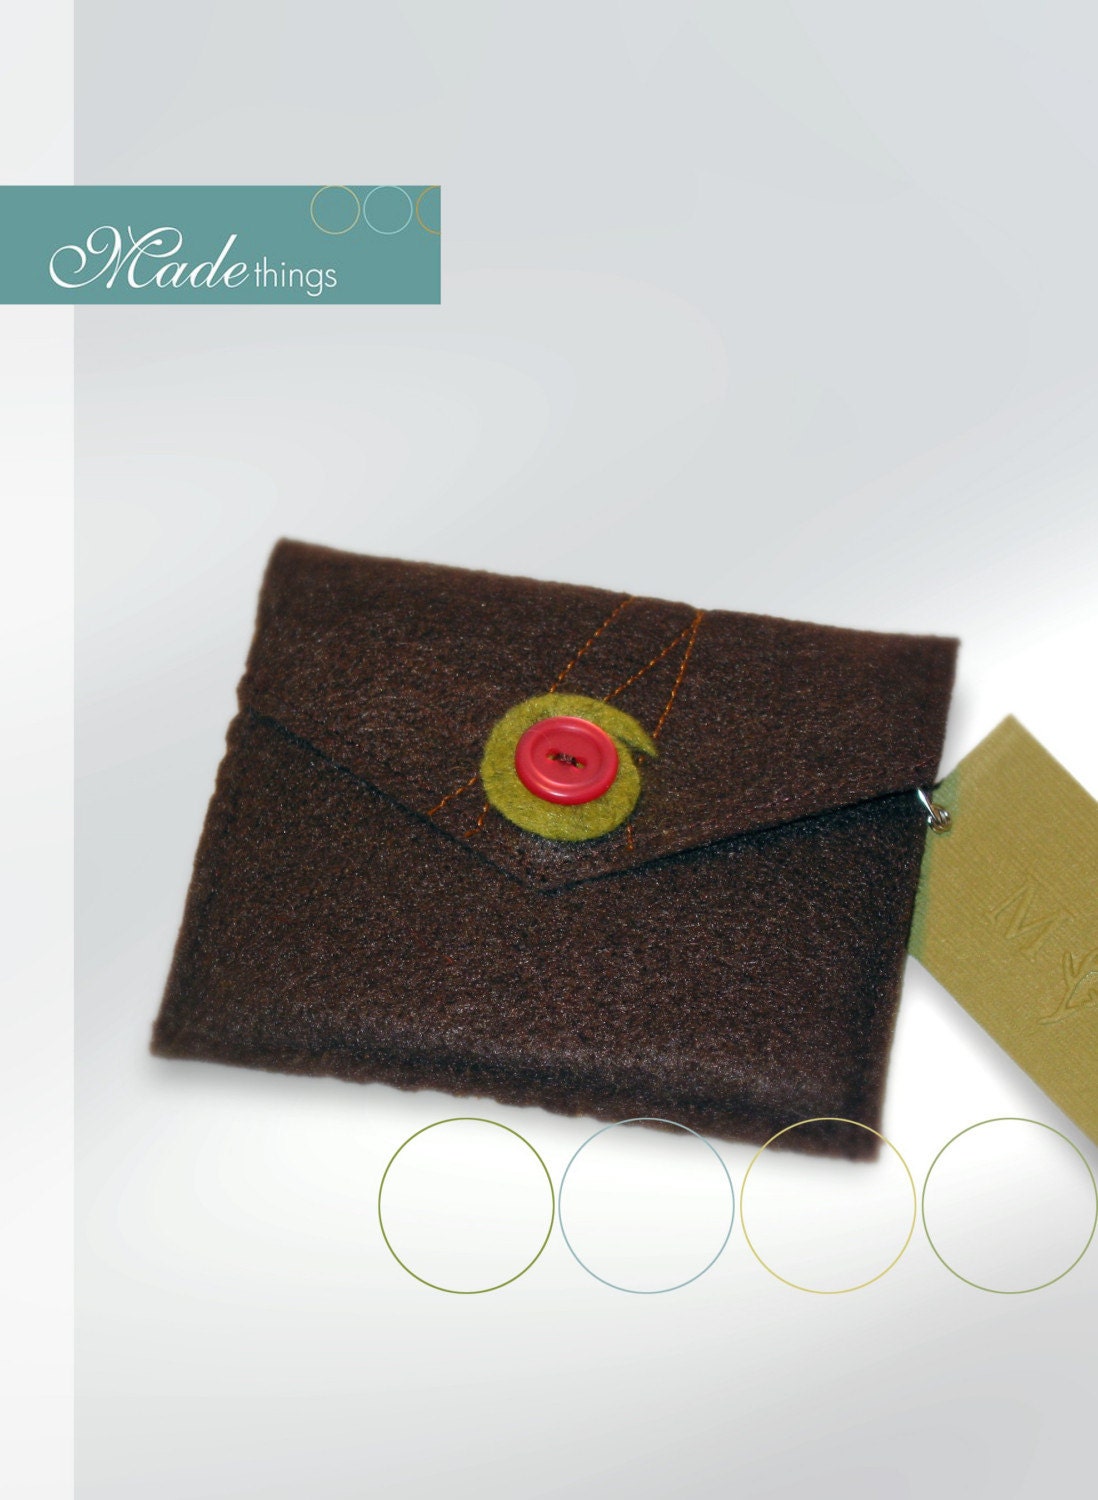 sweet little felt purse (chocolate brown, gold pattern with pink button)